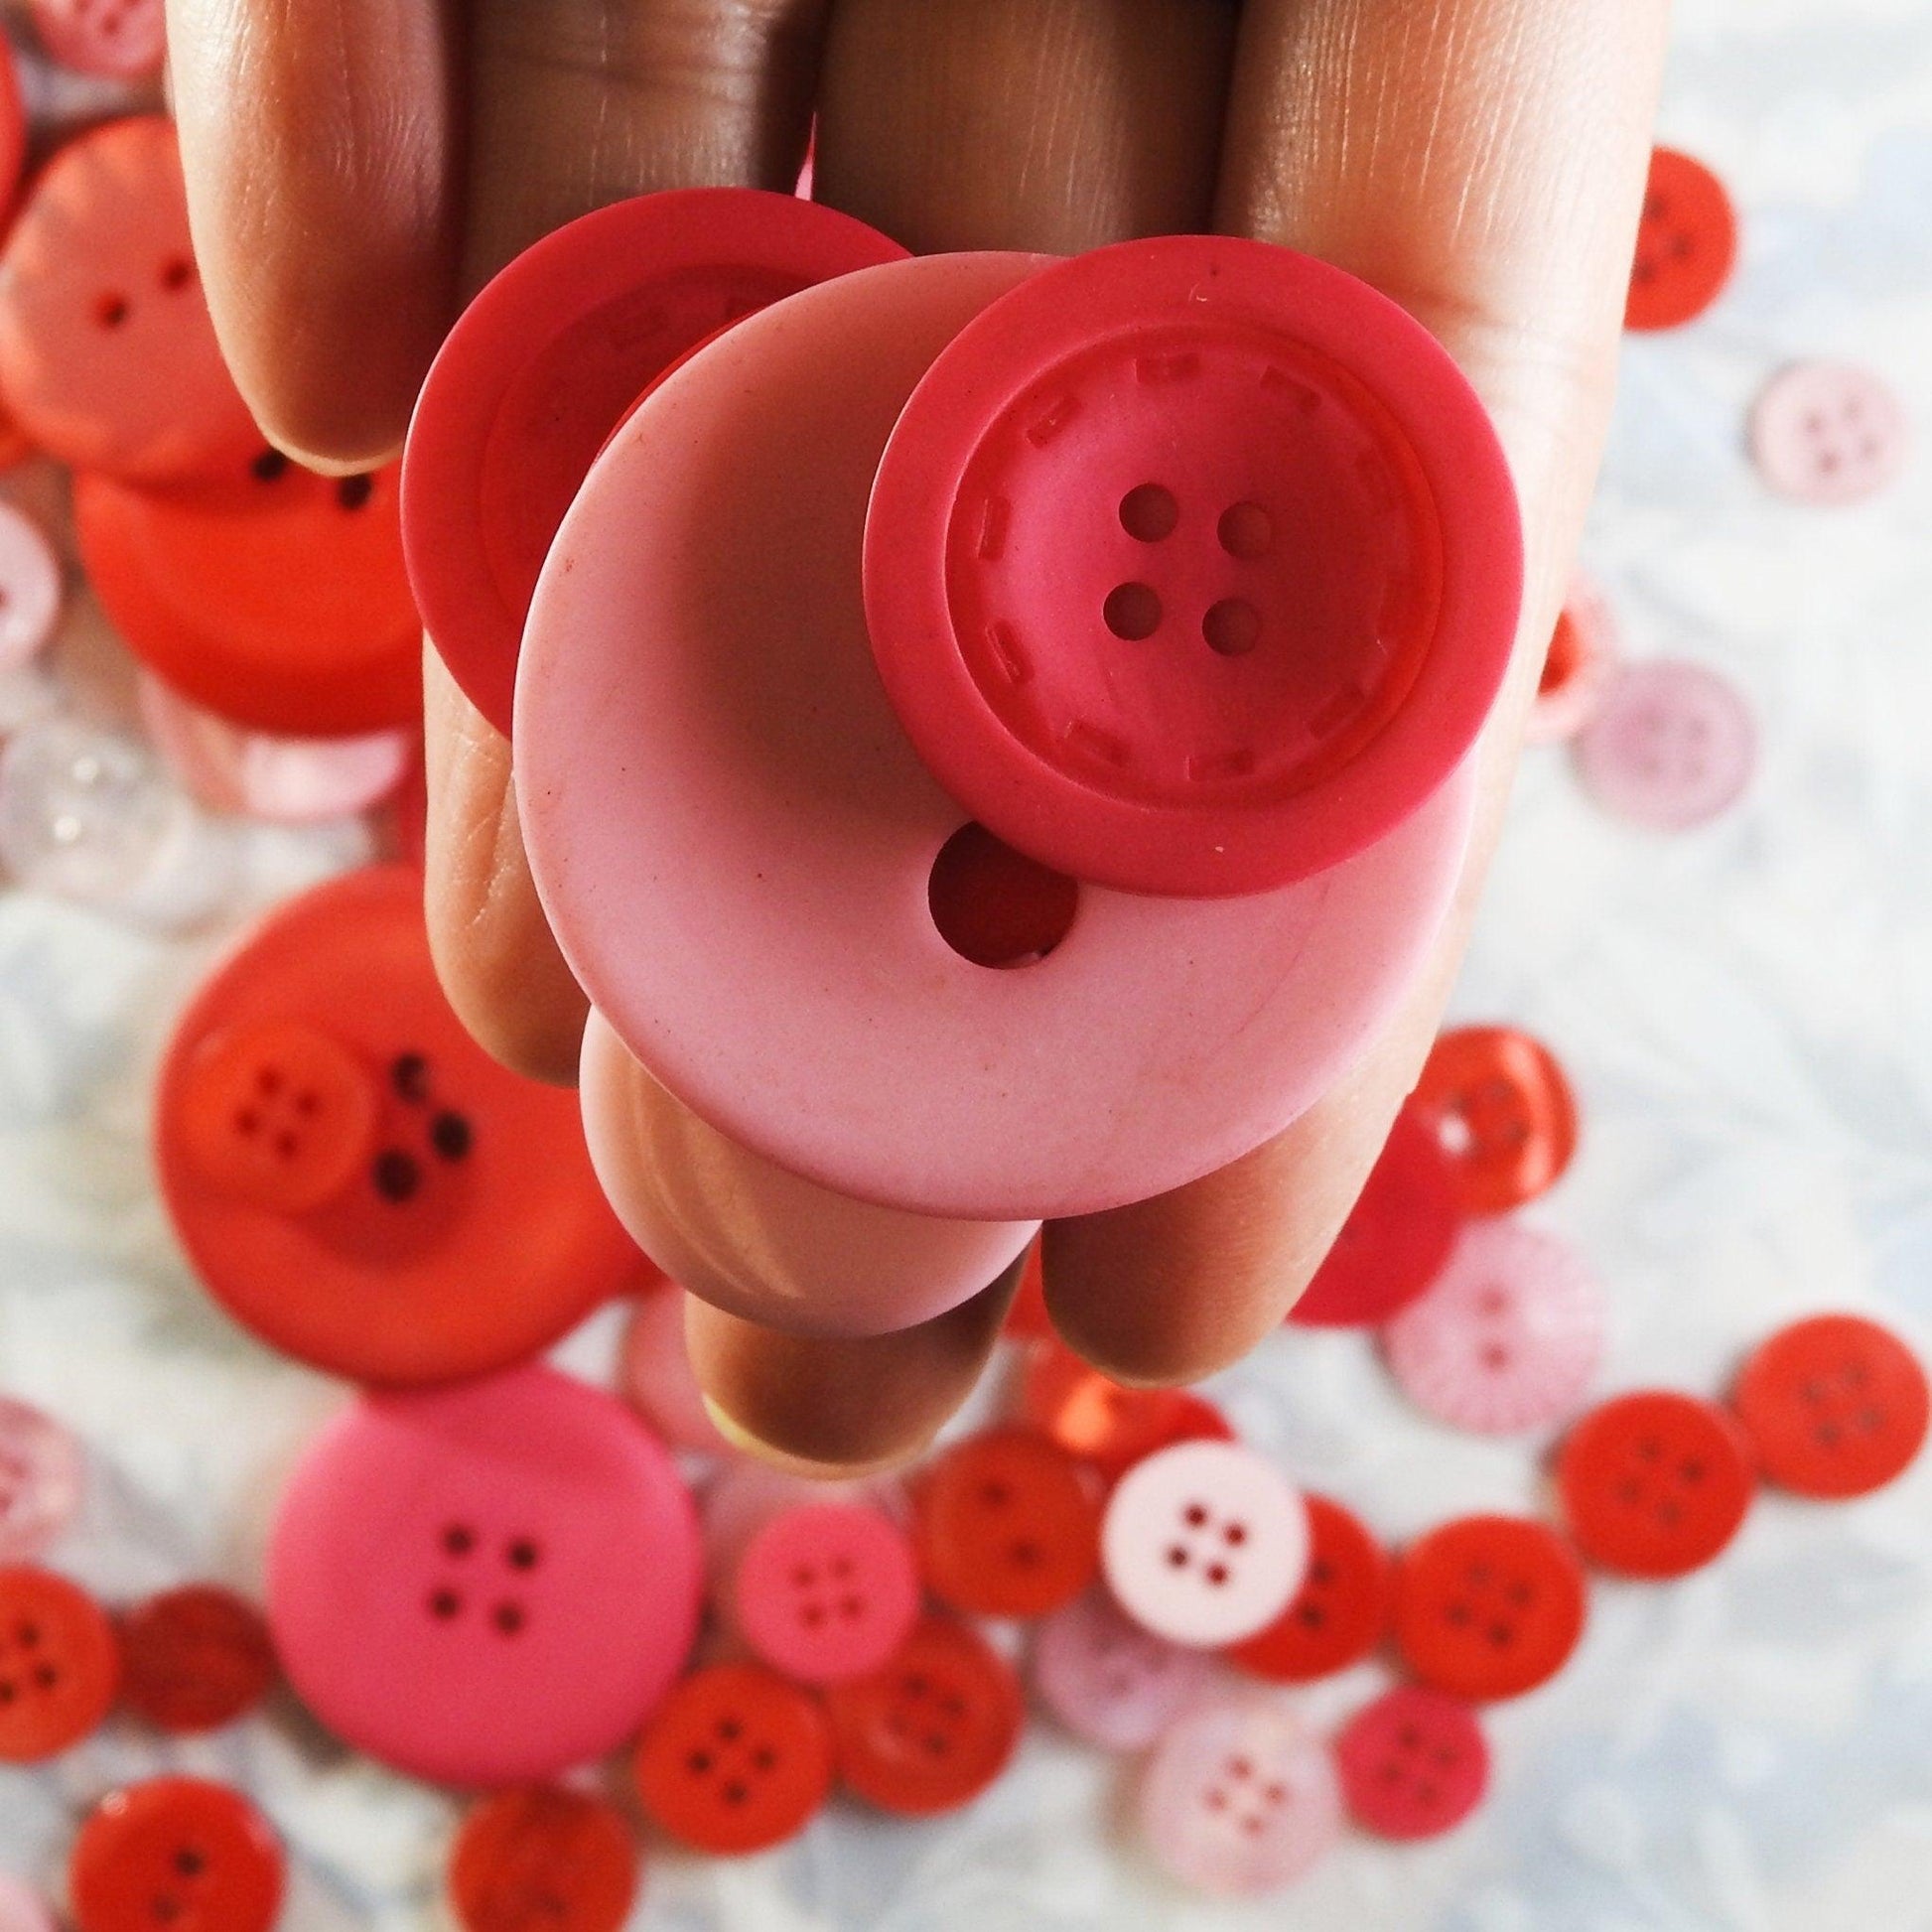 Mixed lot of pink light buttons, red sewing buttons in many styles and colors for button bouquet, headband, hair accessories embellishments